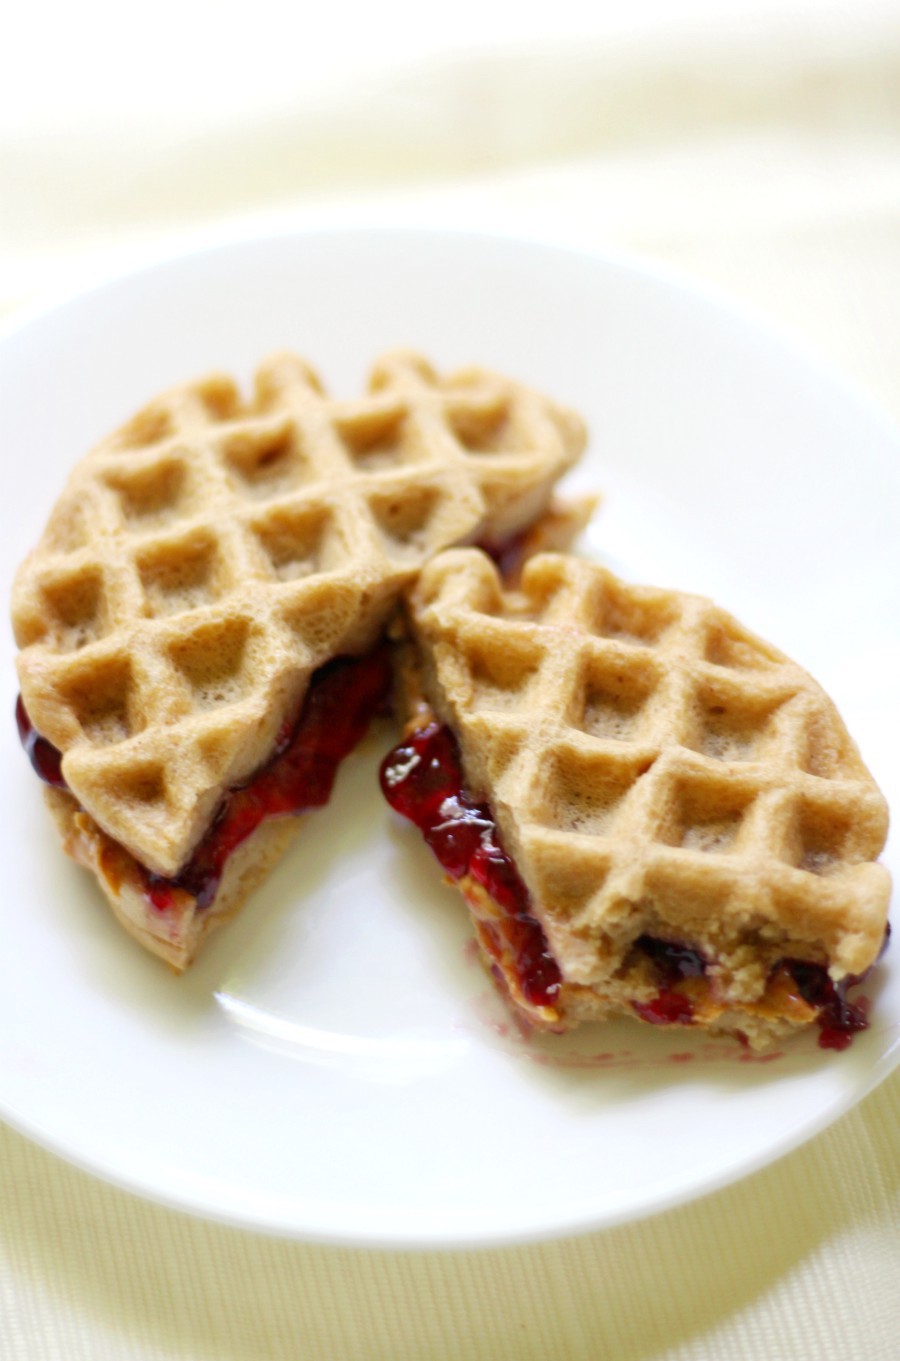 Mini Gluten-Free Peanut Butter & Jelly Waffle Sandwiches (Vegan) | Strength and Sunshine @RebeccaGF666 Breakfast, lunch, or snack, PB&J is good for any time of day! These Mini Gluten-Free Peanut Butter & Jelly Waffle Sandwiches are vegan, fun for kids & adults, healthy & protein-packed! A recipe for all peanut butter lovers and anyone who wants to shakeup their boring sandwich routine!